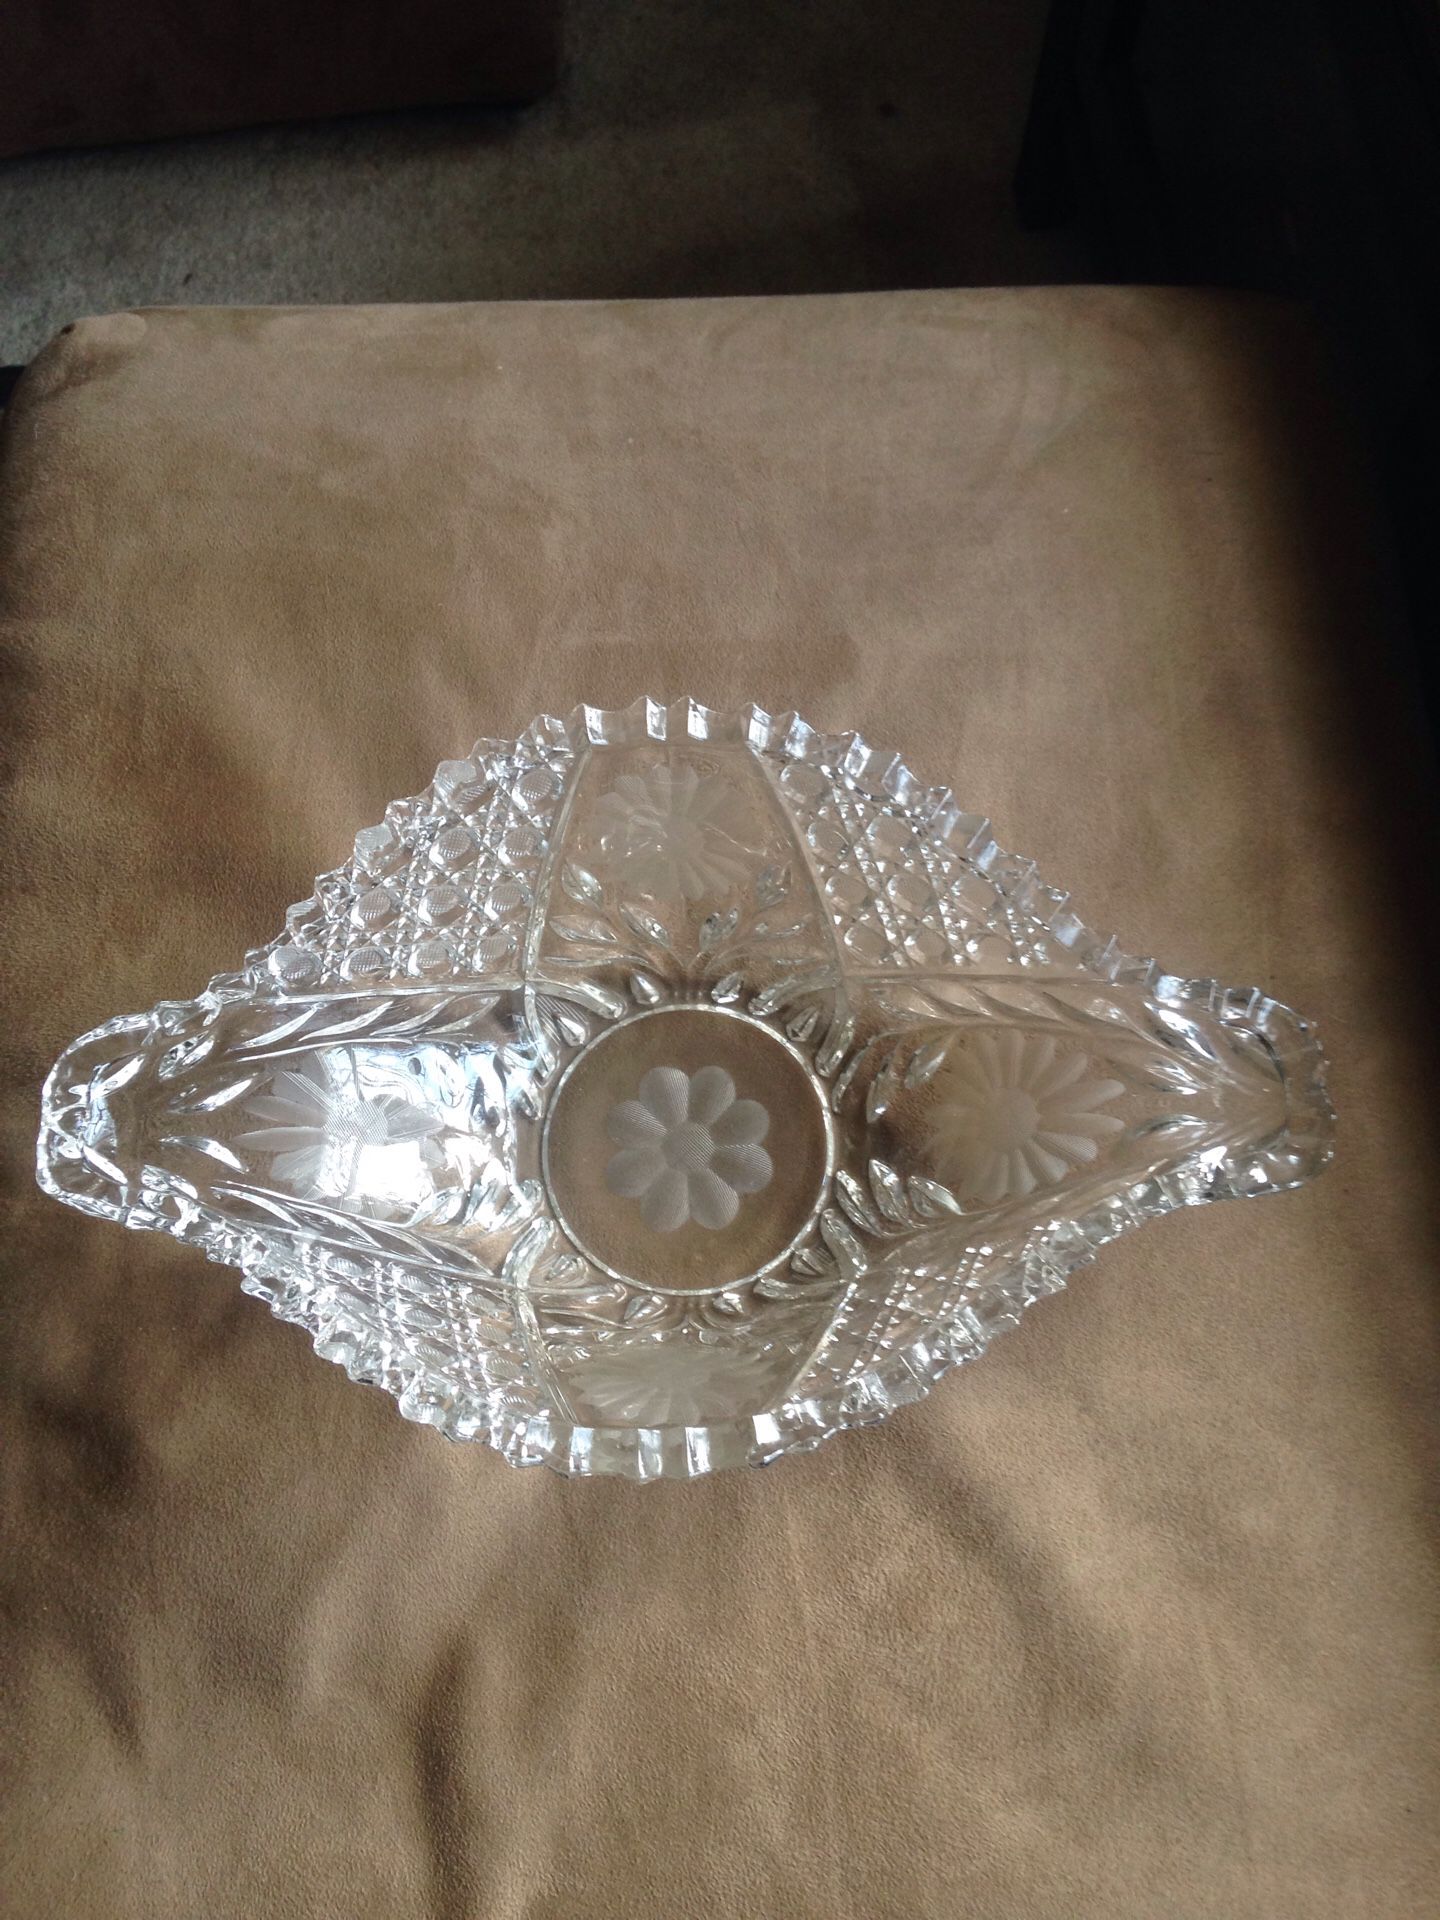 Vintage collectible handmade cut glass fruit bowl 14x8"